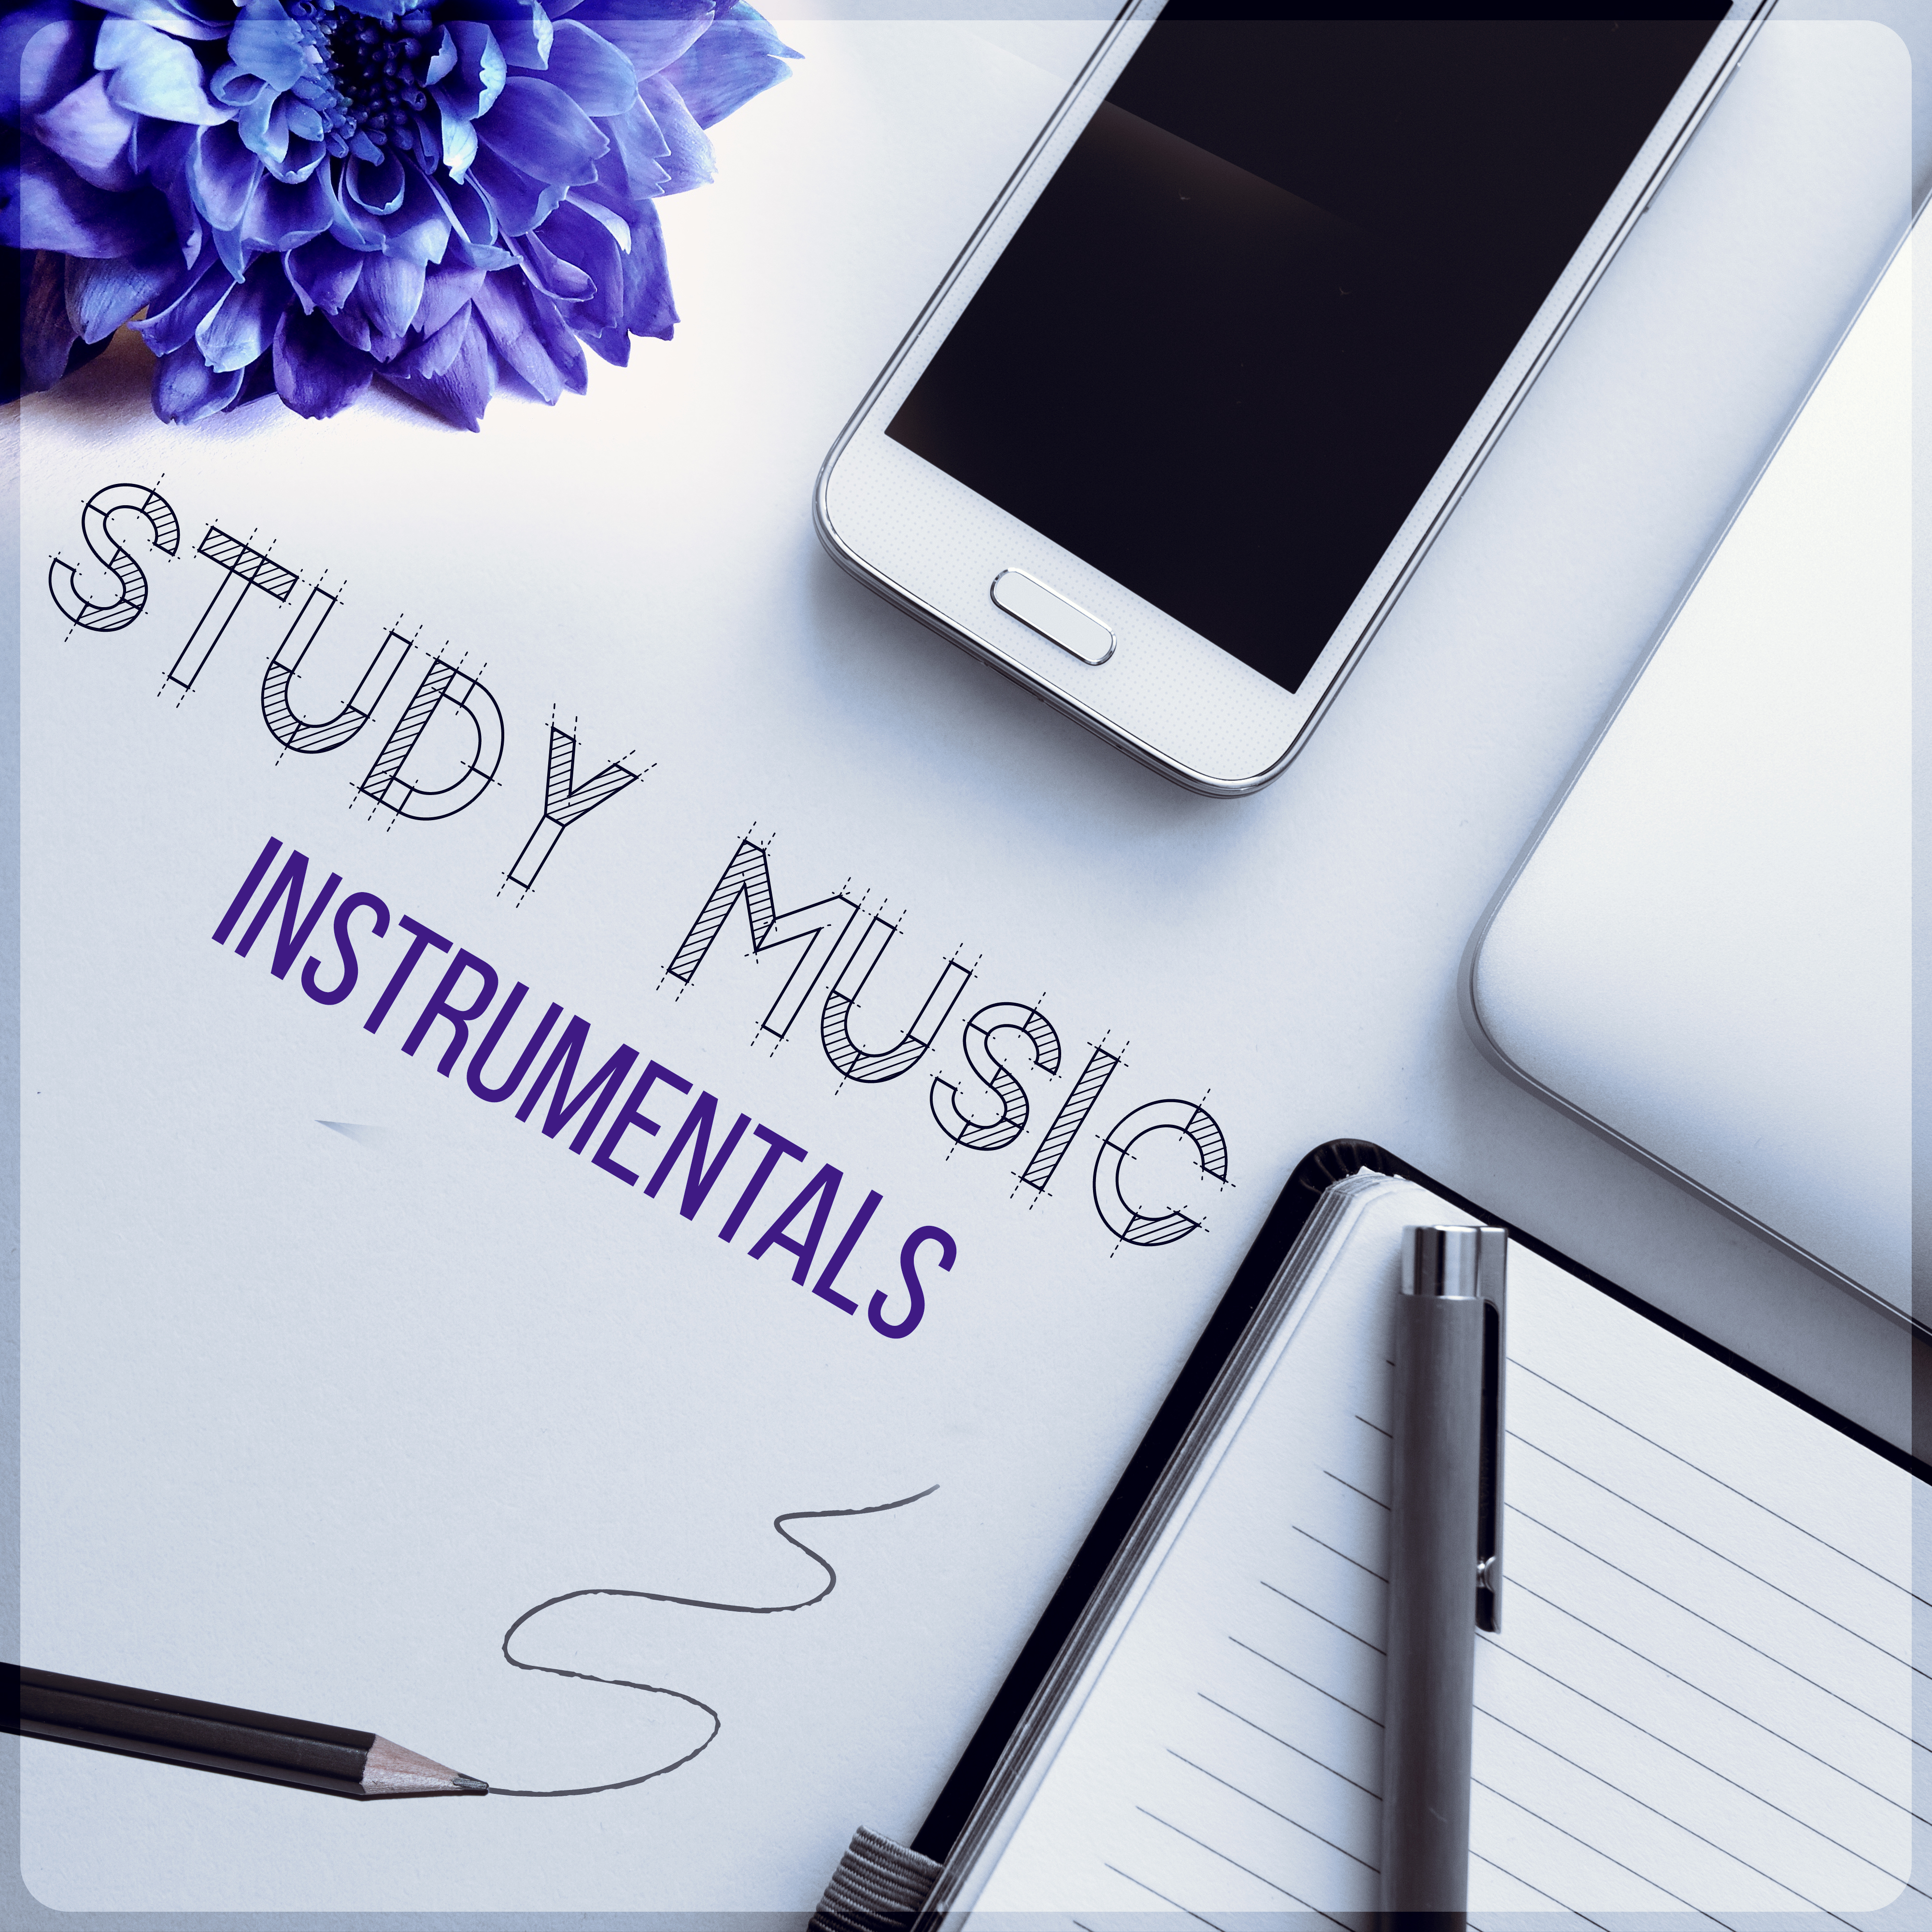 Study Music Instrumentals - Coursework Preparation & Book Reading, Calm Piano Pieces, Concentration, Classical Anti Stress Music